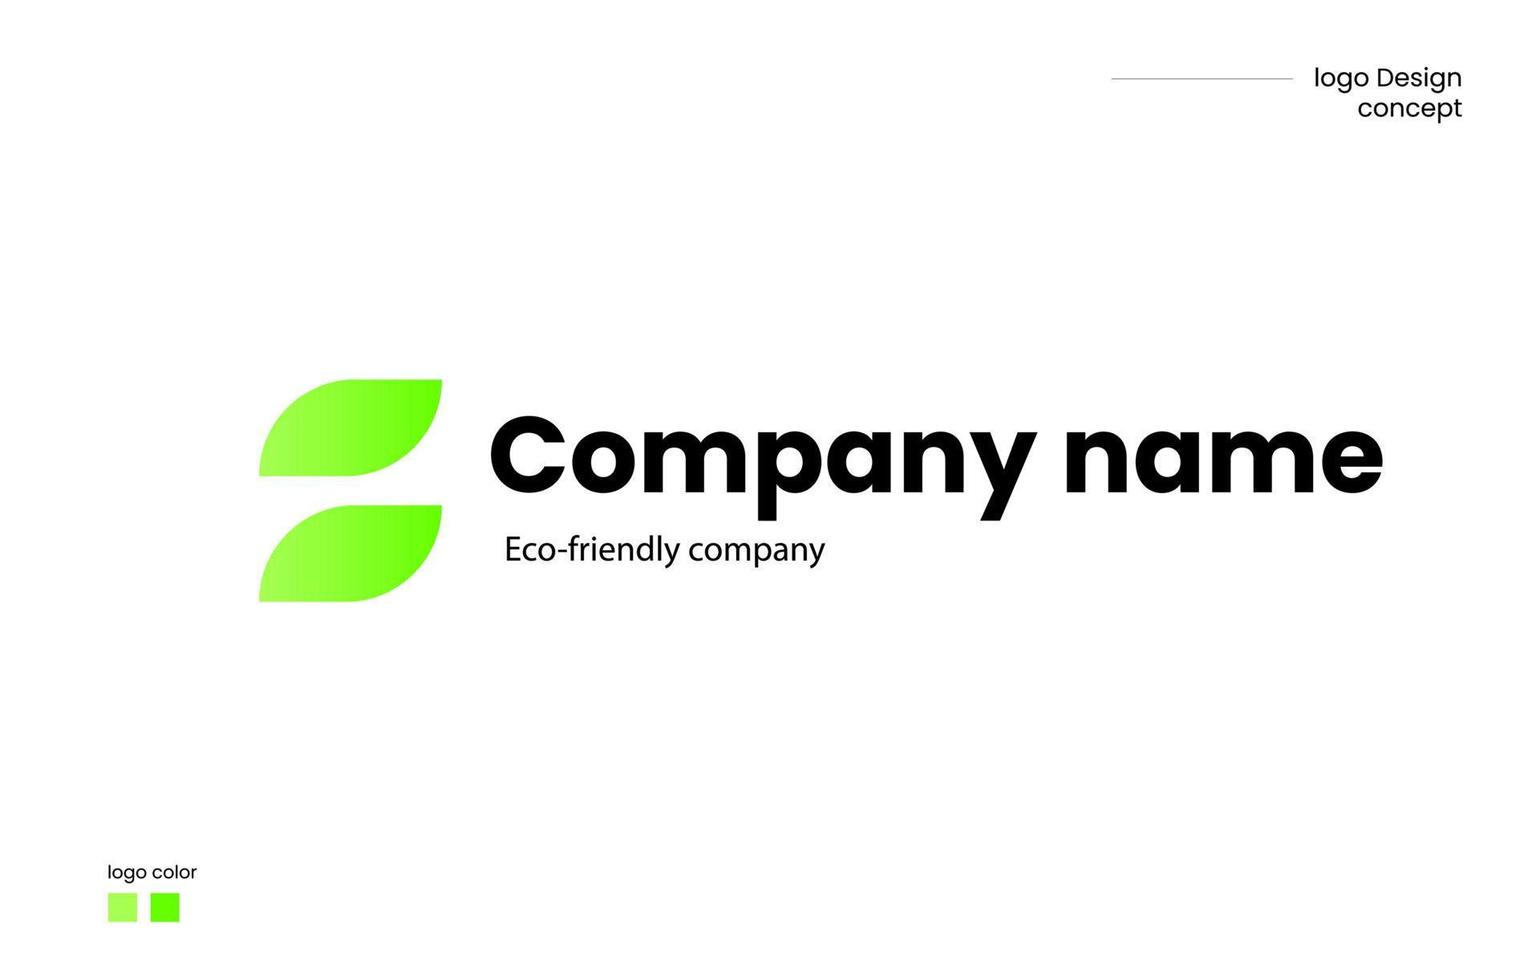 a logo or can be used as an eco-friendly company icon. simple logo fesign with green gradient color vector